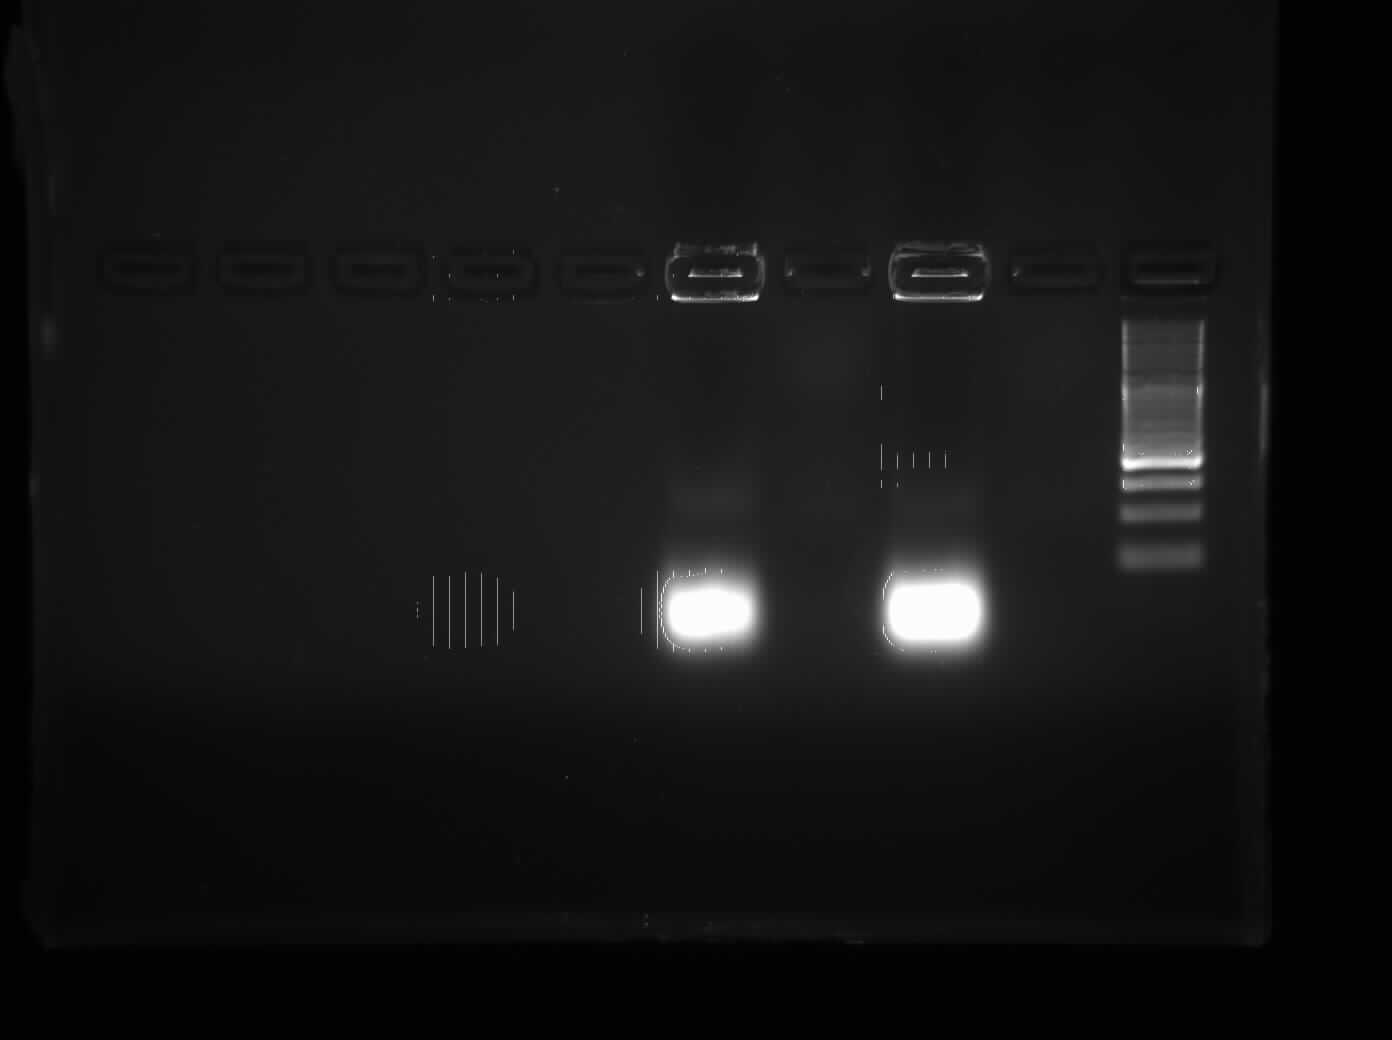 Troubleshooting PCR Part Two: What to Do When You Are Not Getting Bands - Ooooh Noooo - No PCR Bands!